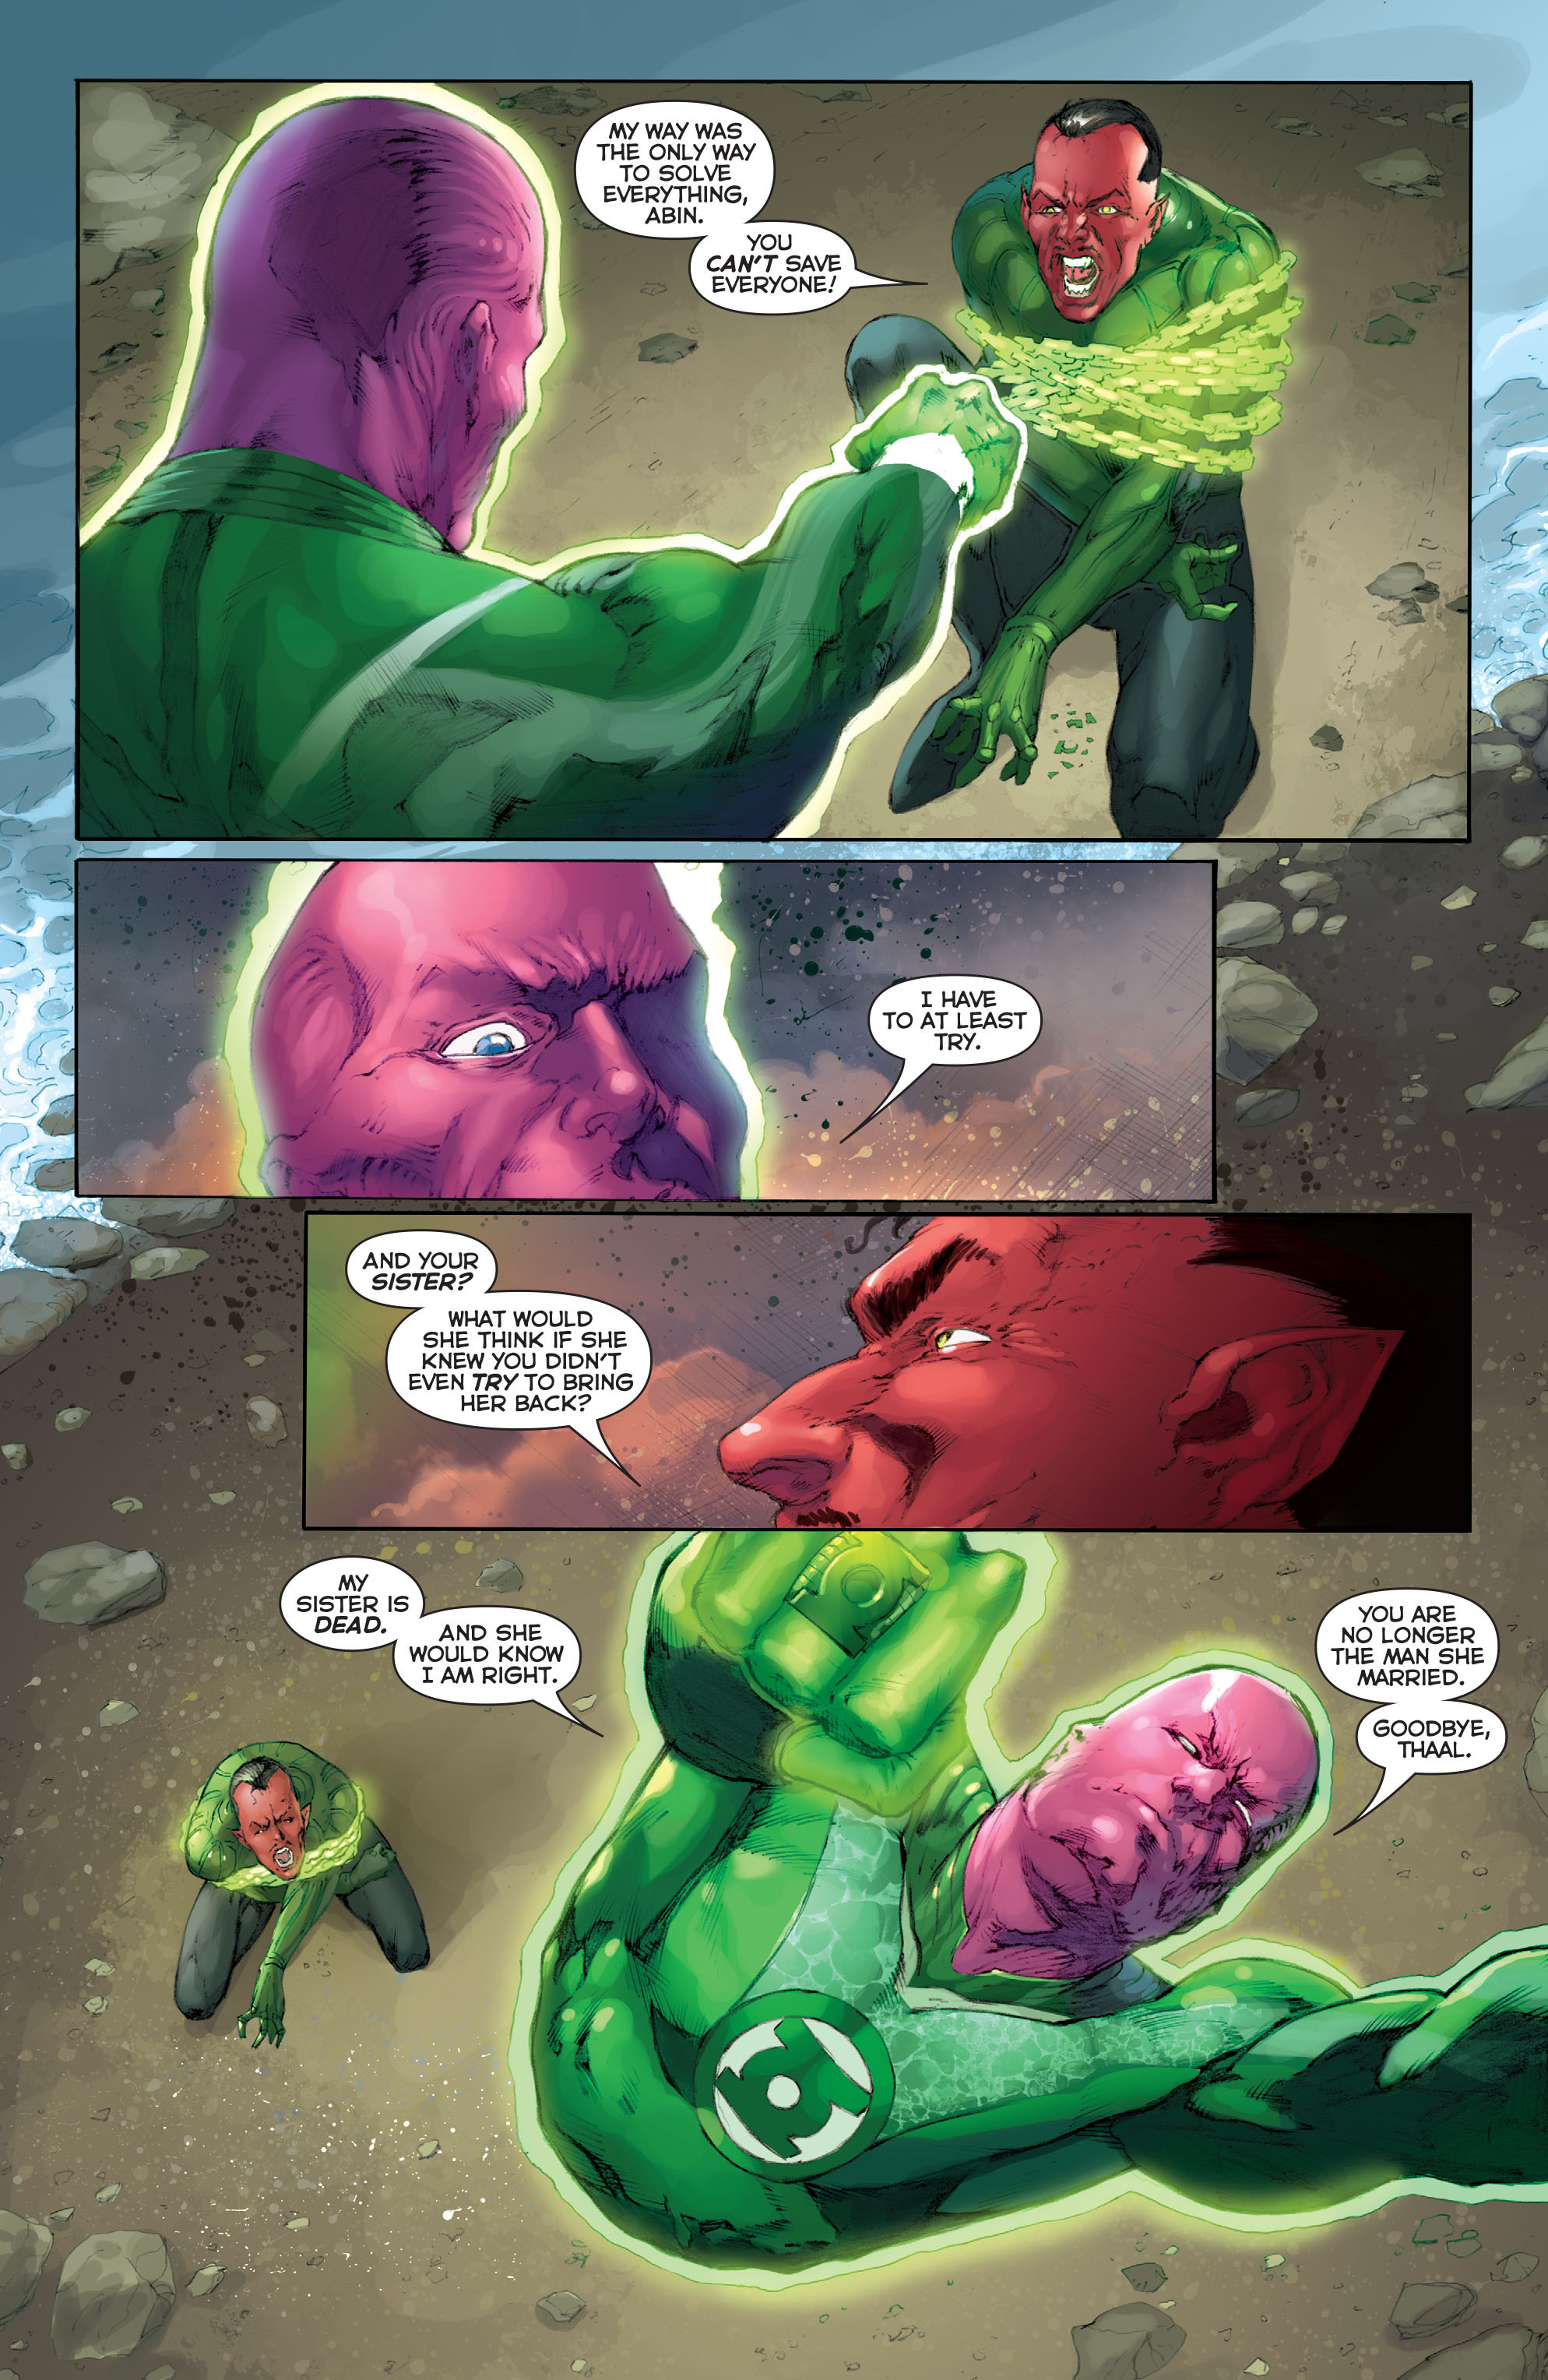 Flashpoint: The World of Flashpoint Featuring Green Lantern Full #1 - English 50